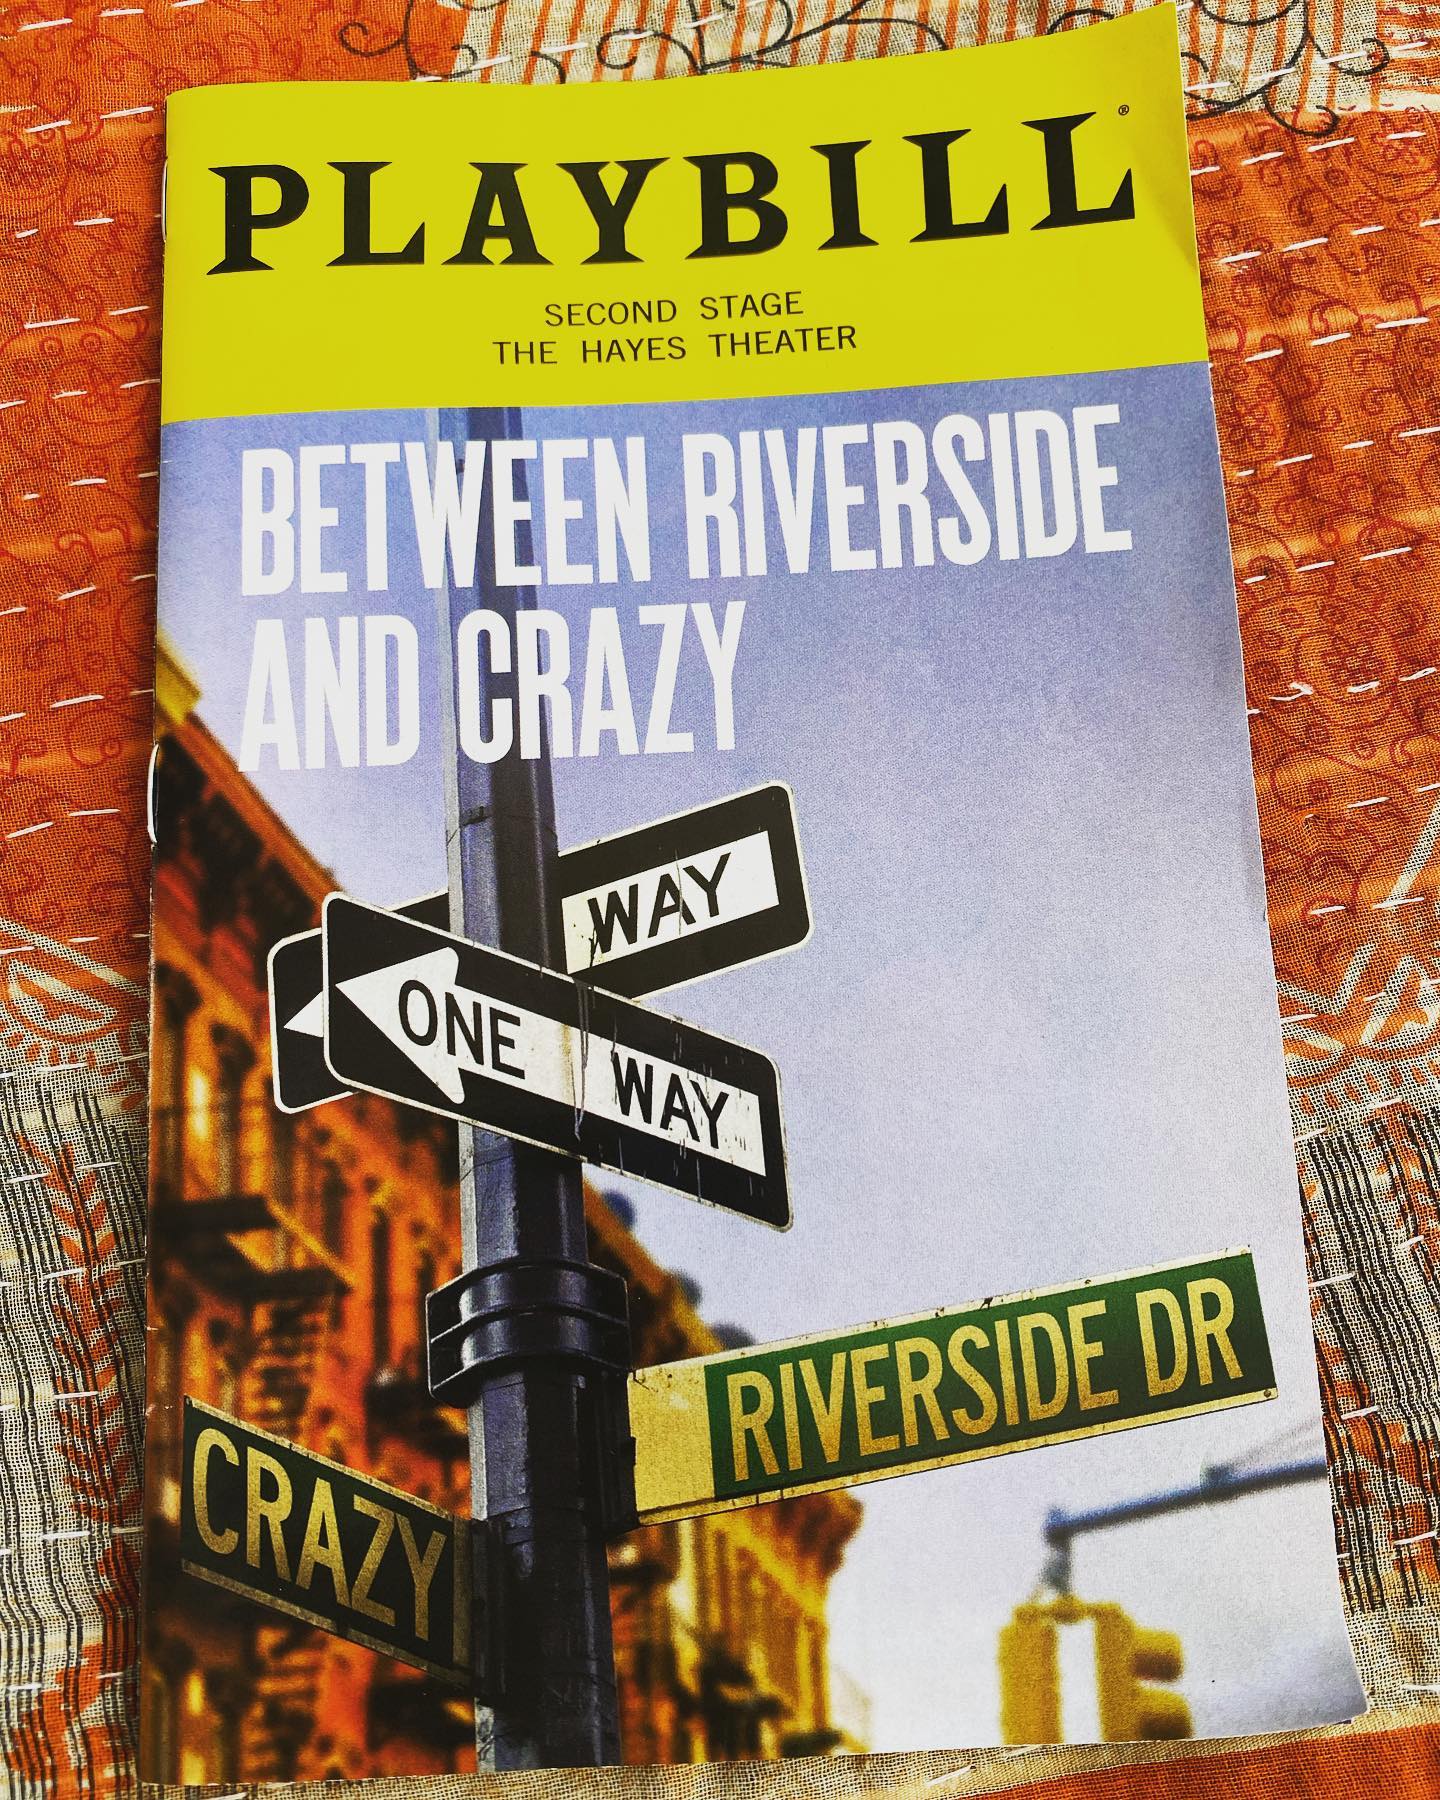 I thrill at a good ensemble play. Every scene in #betweenriversideandcrazy by @stephenadlyguirgis has delicious tension and a revelation. All delicately balanced with humor. A pleasure to absorb. Stephen McKinley Henderson is stage royalty.  @2stnyc has quite a year brewing, I’m excited! #broadwayplay #broadwaytheatre #helenhayestheatre #iloveplays #nyctheatre #ilovetheatre #stageplay #nycstage #nyc